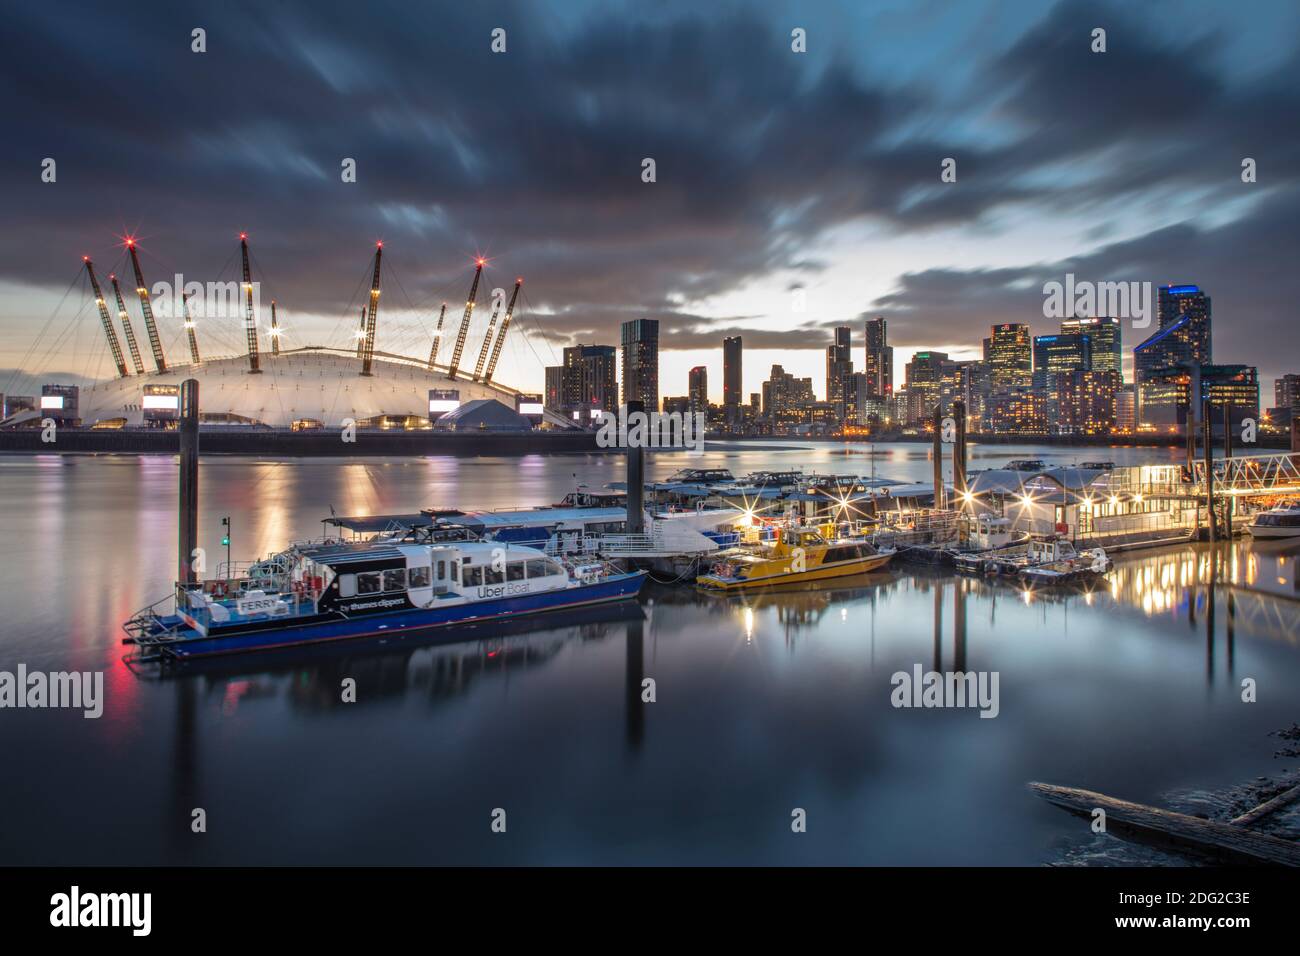 London, skyline of Docklands Canary Wharf commercial centre, O2 concert arena & events venue, river boats on the Thames, dusk, illuminated buildings Stock Photo